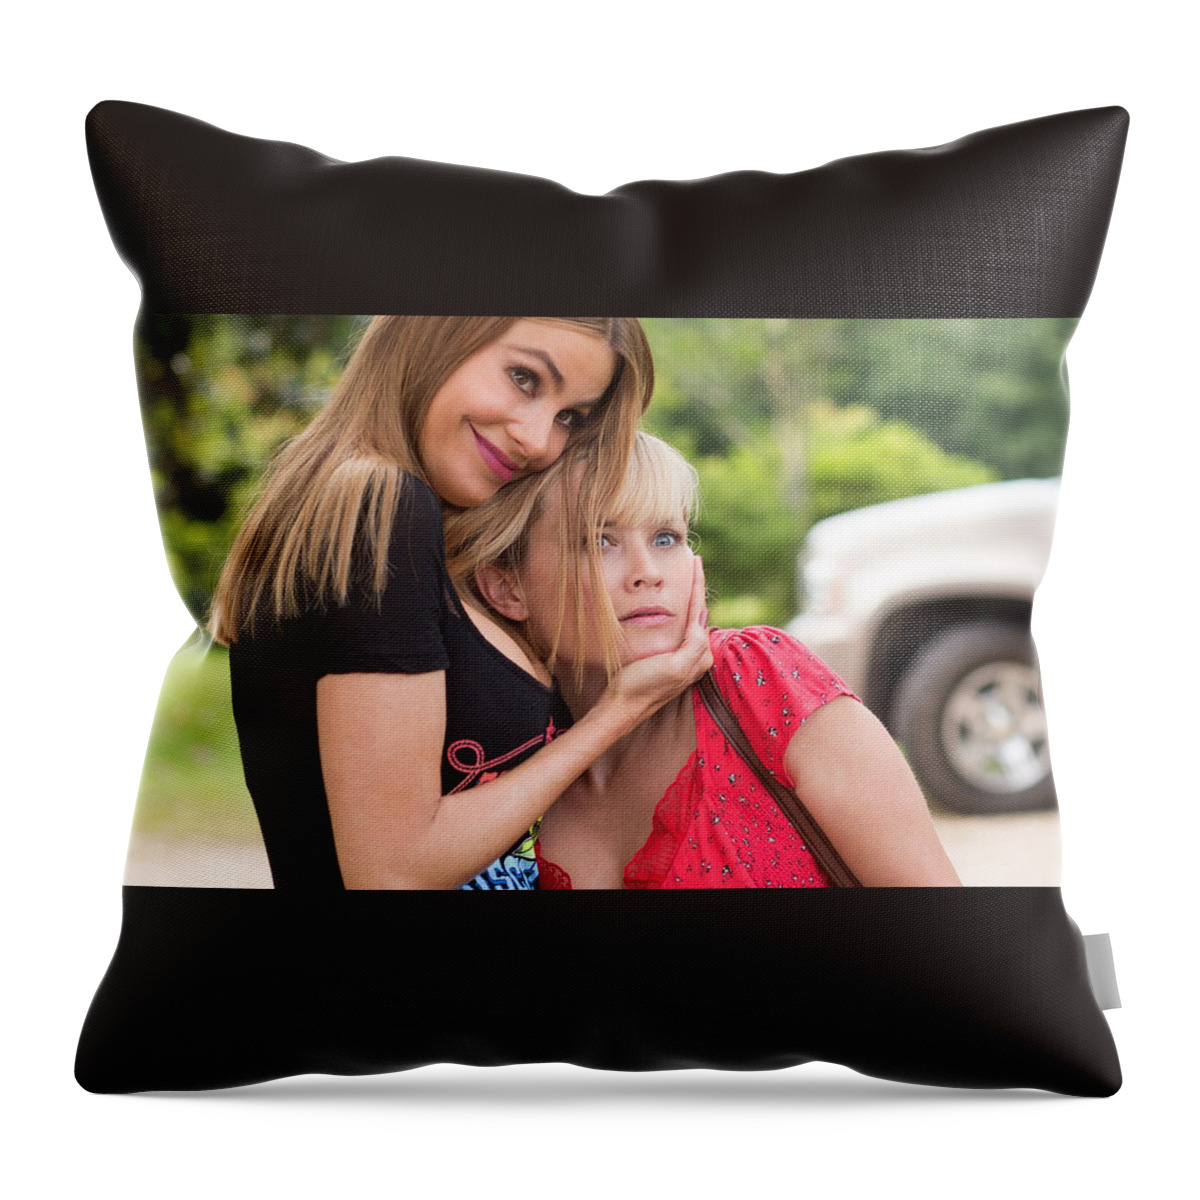 Hot Pursuit Throw Pillow featuring the photograph Hot Pursuit by Jackie Russo